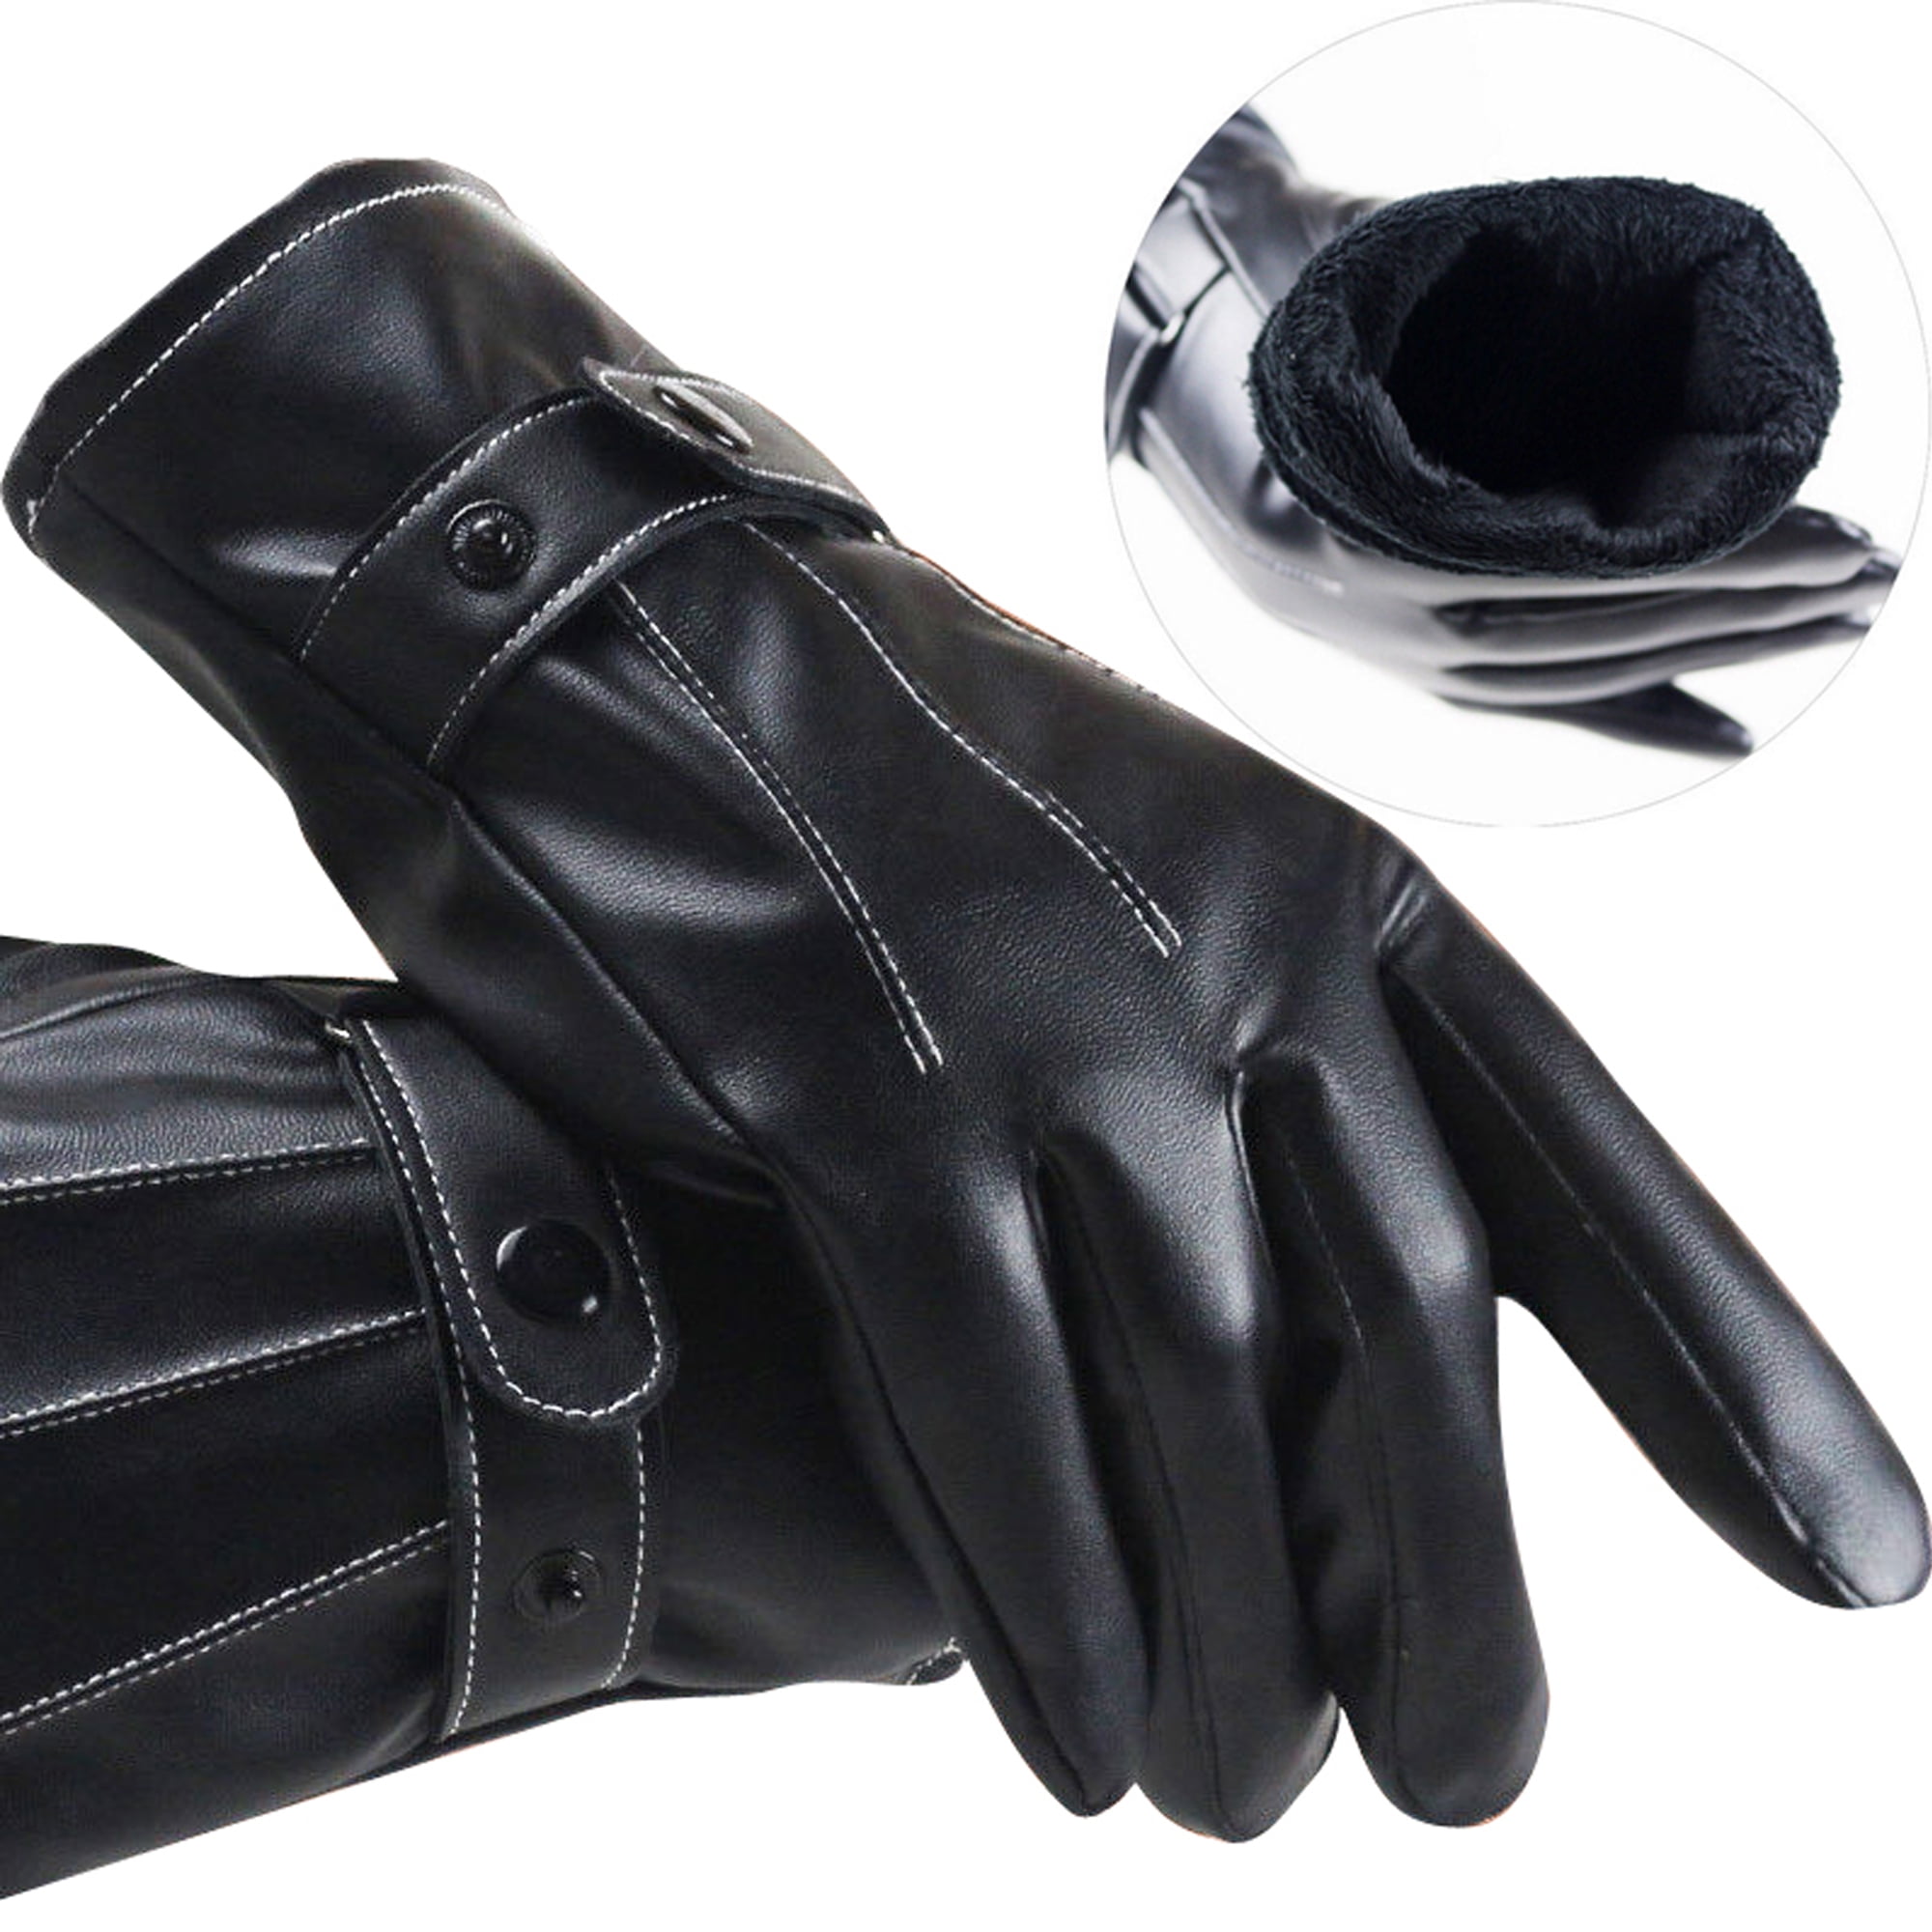 Fly® Male Winter Leather Gloves Wool Lining Motorcycle Leather Gloves Black 